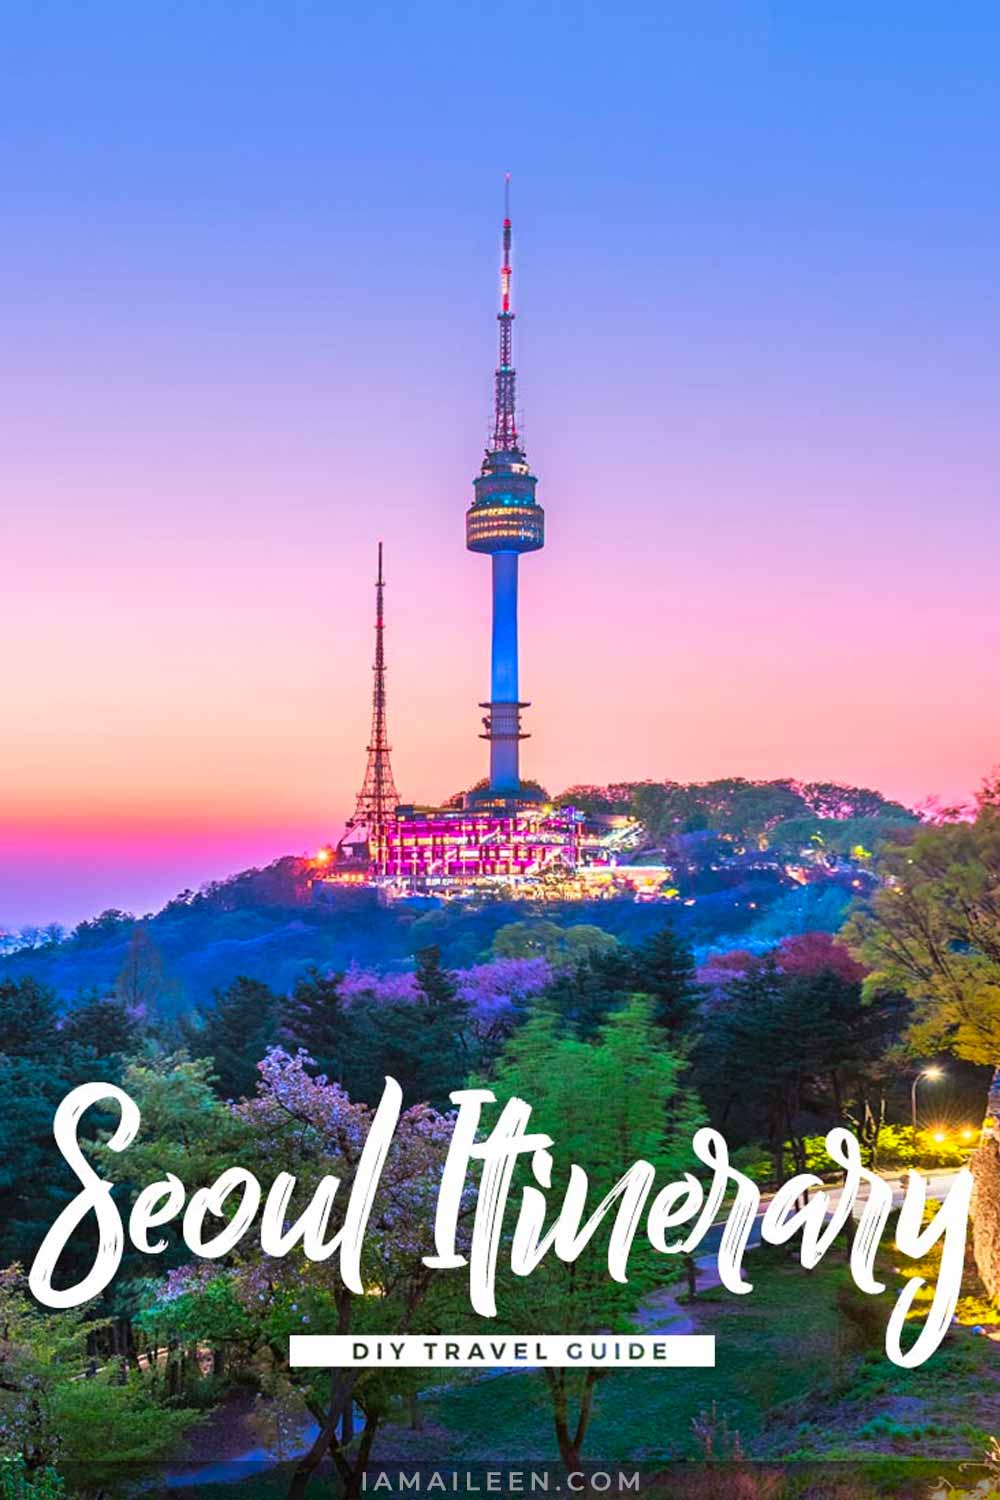 DIY Trip Seoul Itinerary & Travel Guide: 5 Days (More or Less)